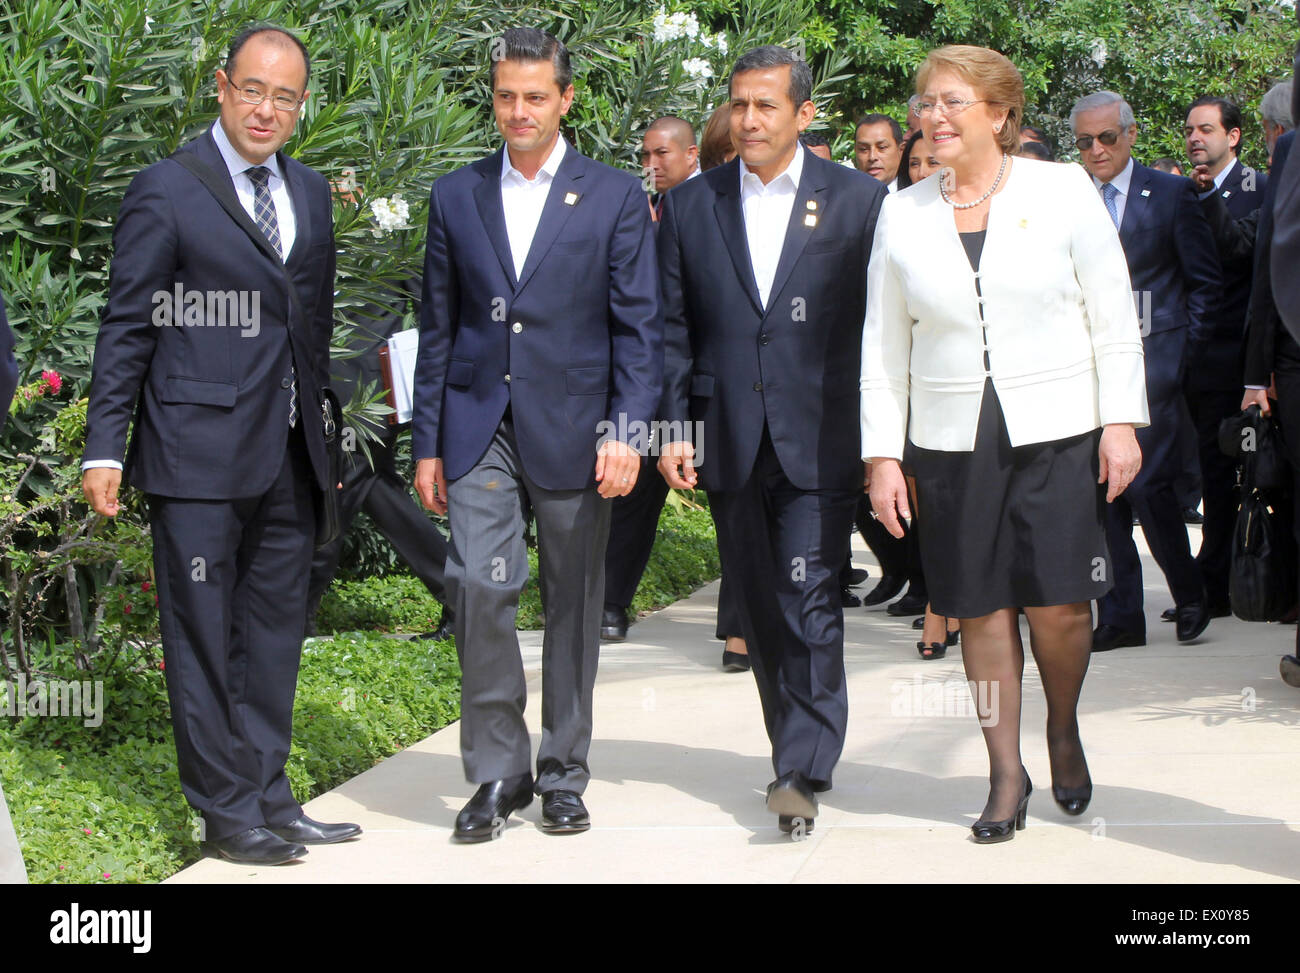 Paracas, Peru. 3rd July, 2015. Peruvian President Ollanta Humala (2nd R), Chilean President Michelle Bachelet (1st R), and Mexican President Enrique Pena Nieto (2nd L), meet in the framework of the 10th Pacific Alliance Summit, in Paracas, Peru, on July 3, 2015. Credit:  Luis Camacho/Xinhua/Alamy Live News Stock Photo